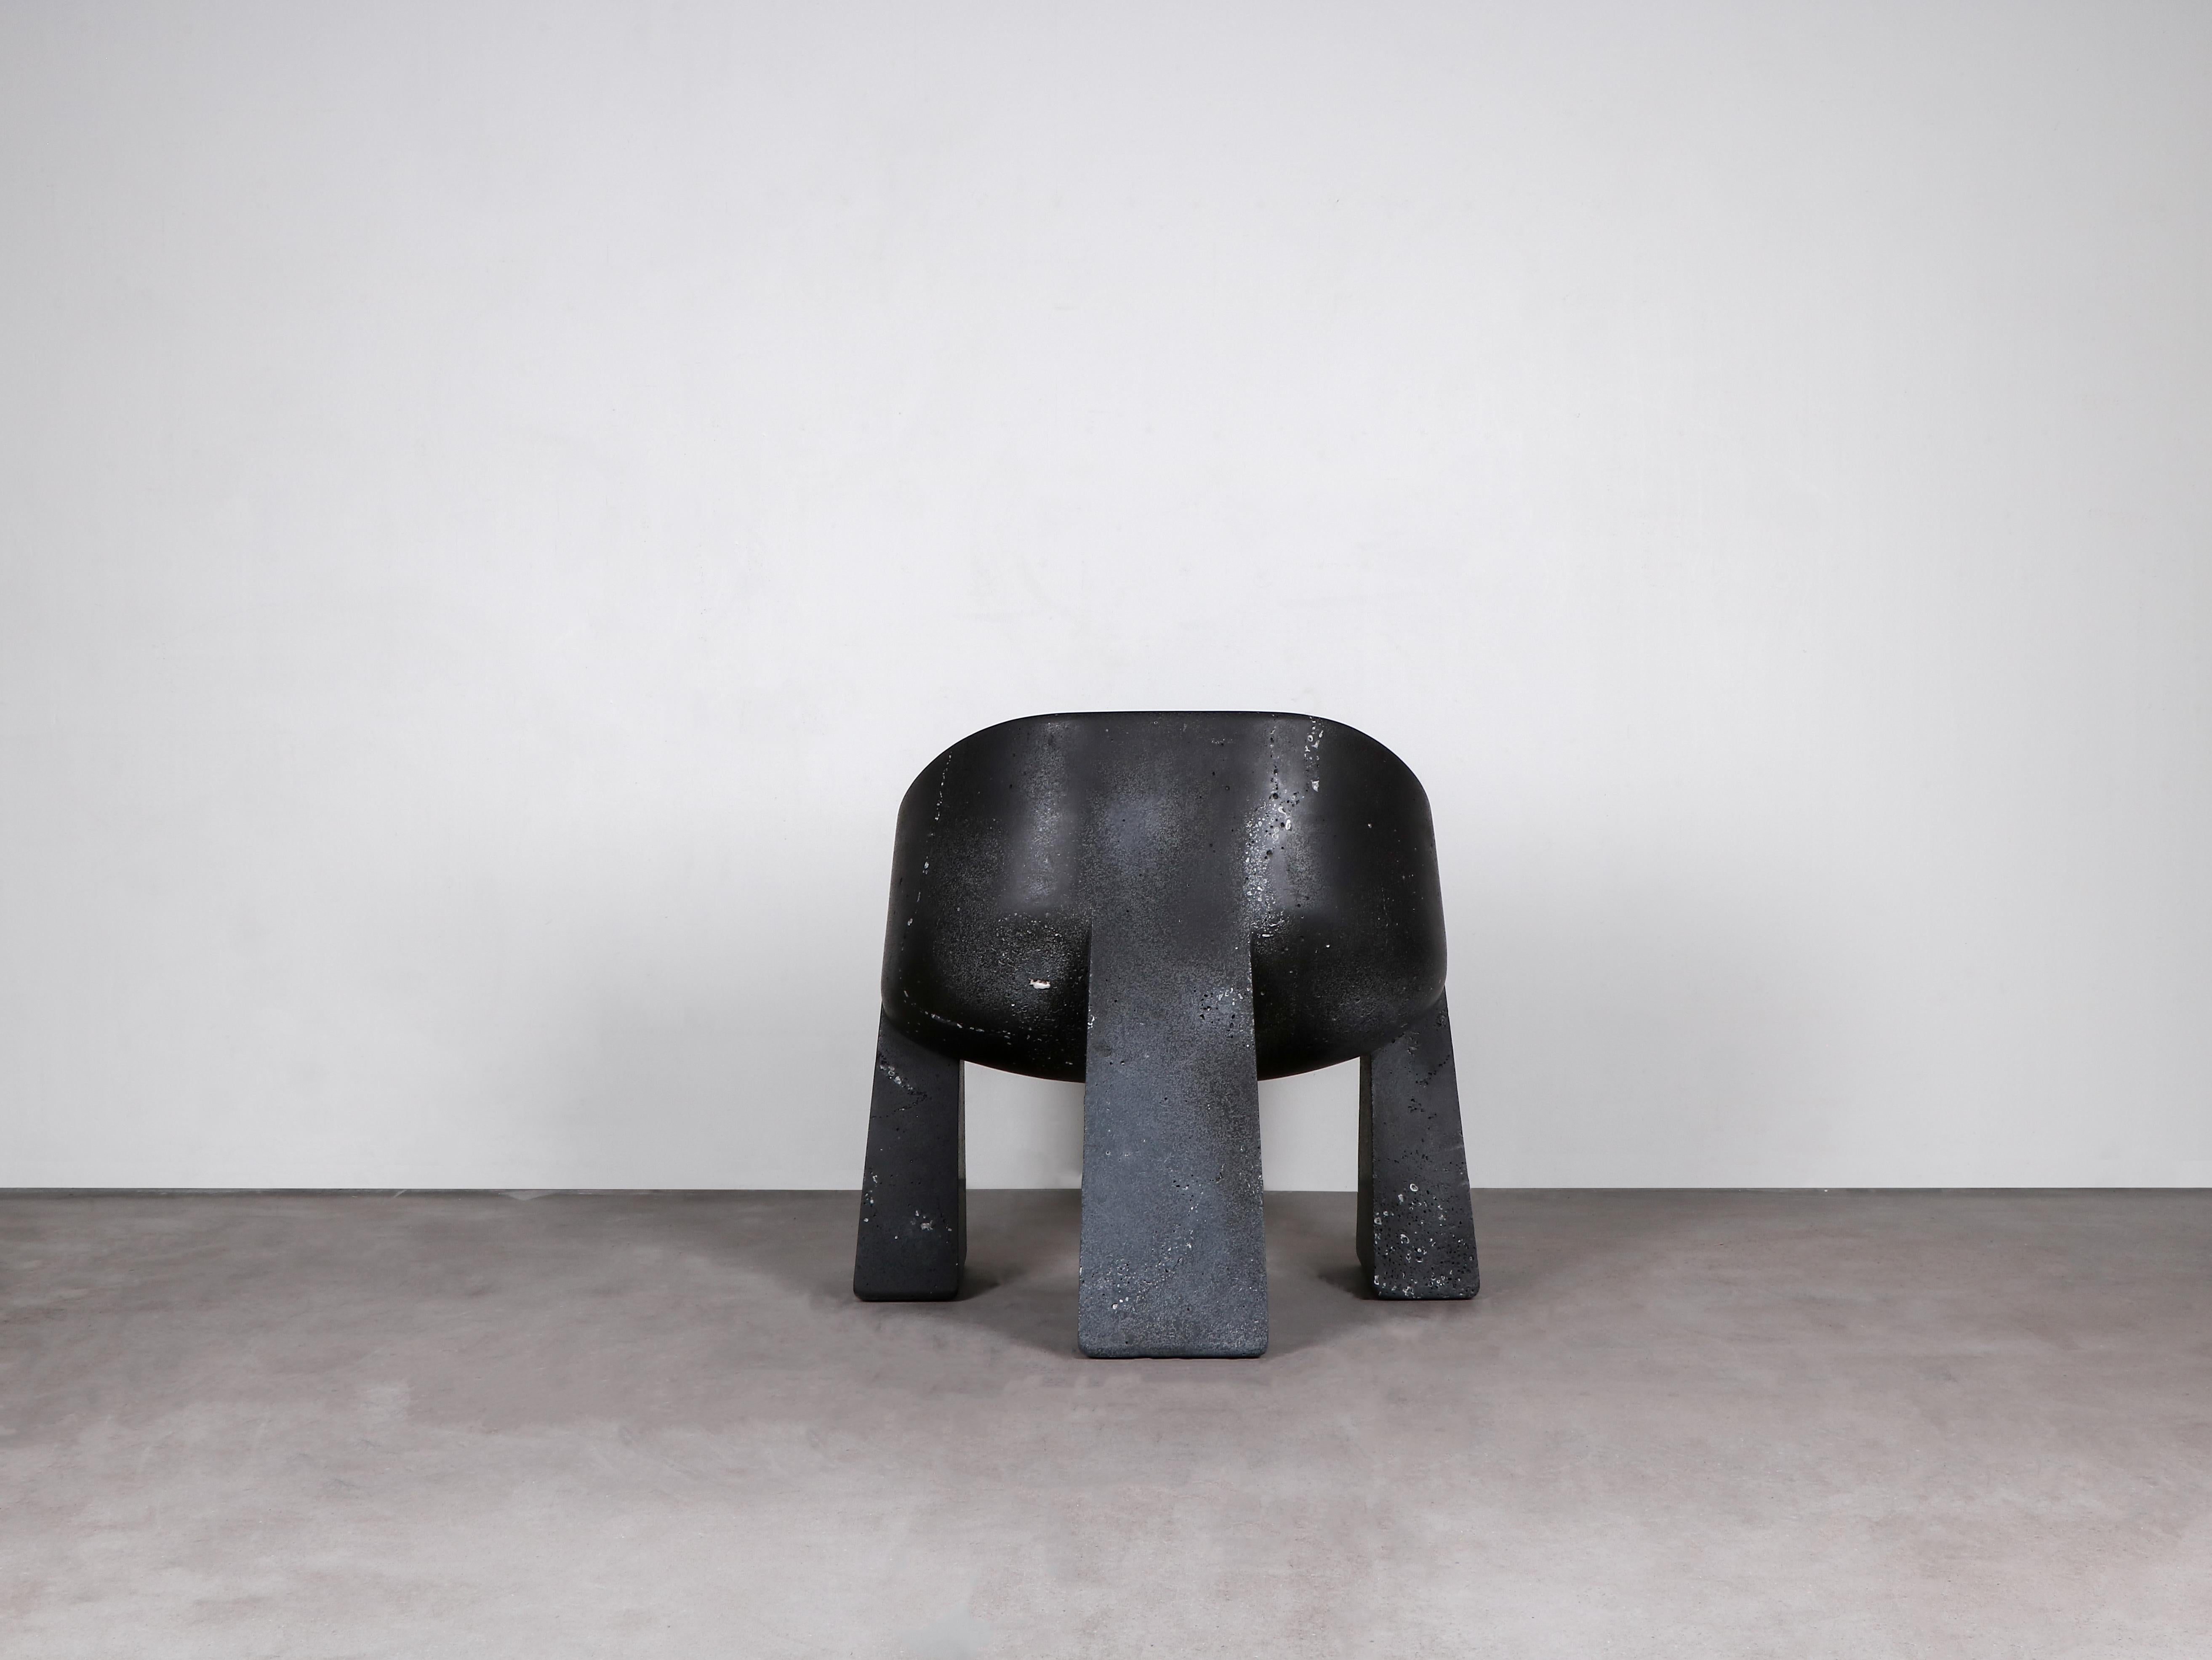 Contemporary Black Armchair in Basalt - Klot Basalt Chair by Lucas Morten

2022
Limited edition of 6 + 1 AP
Dimensions (cm): H 57 D 65 W 60
Material: Basalt

Klot chair came from a complex journey through the world of geometry. in the search